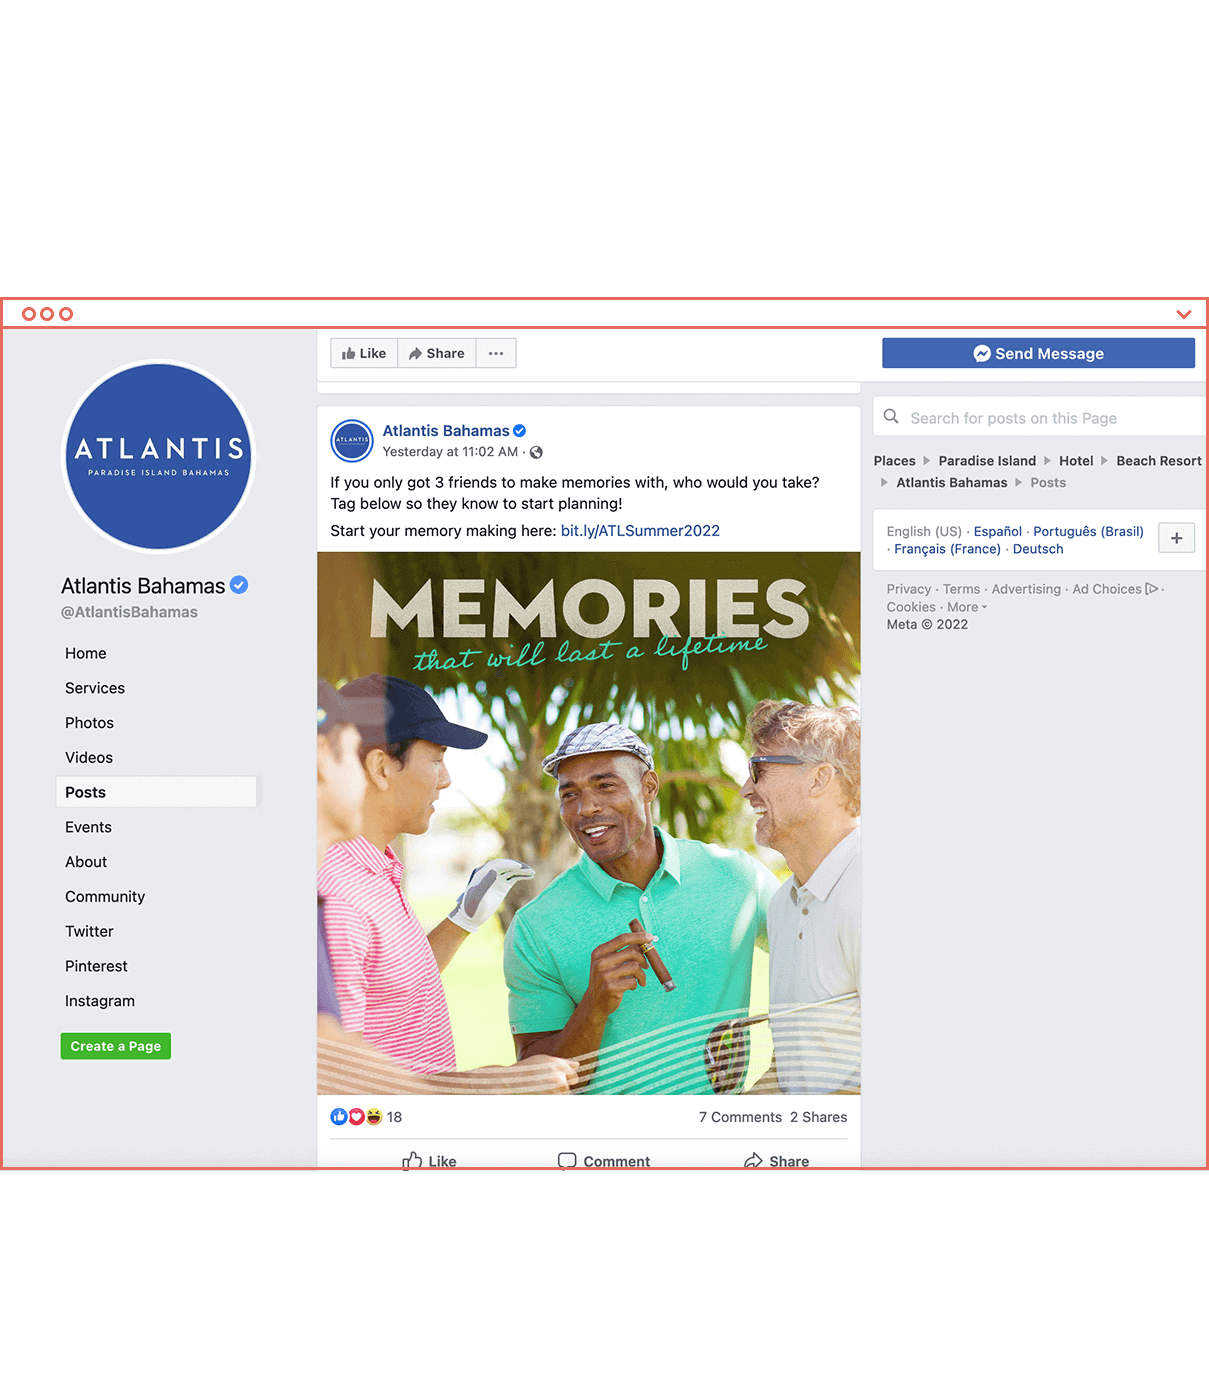 Wireframe mockup of web browser with screenshot of Atlantis Bahamas Facebook page showing designed ad